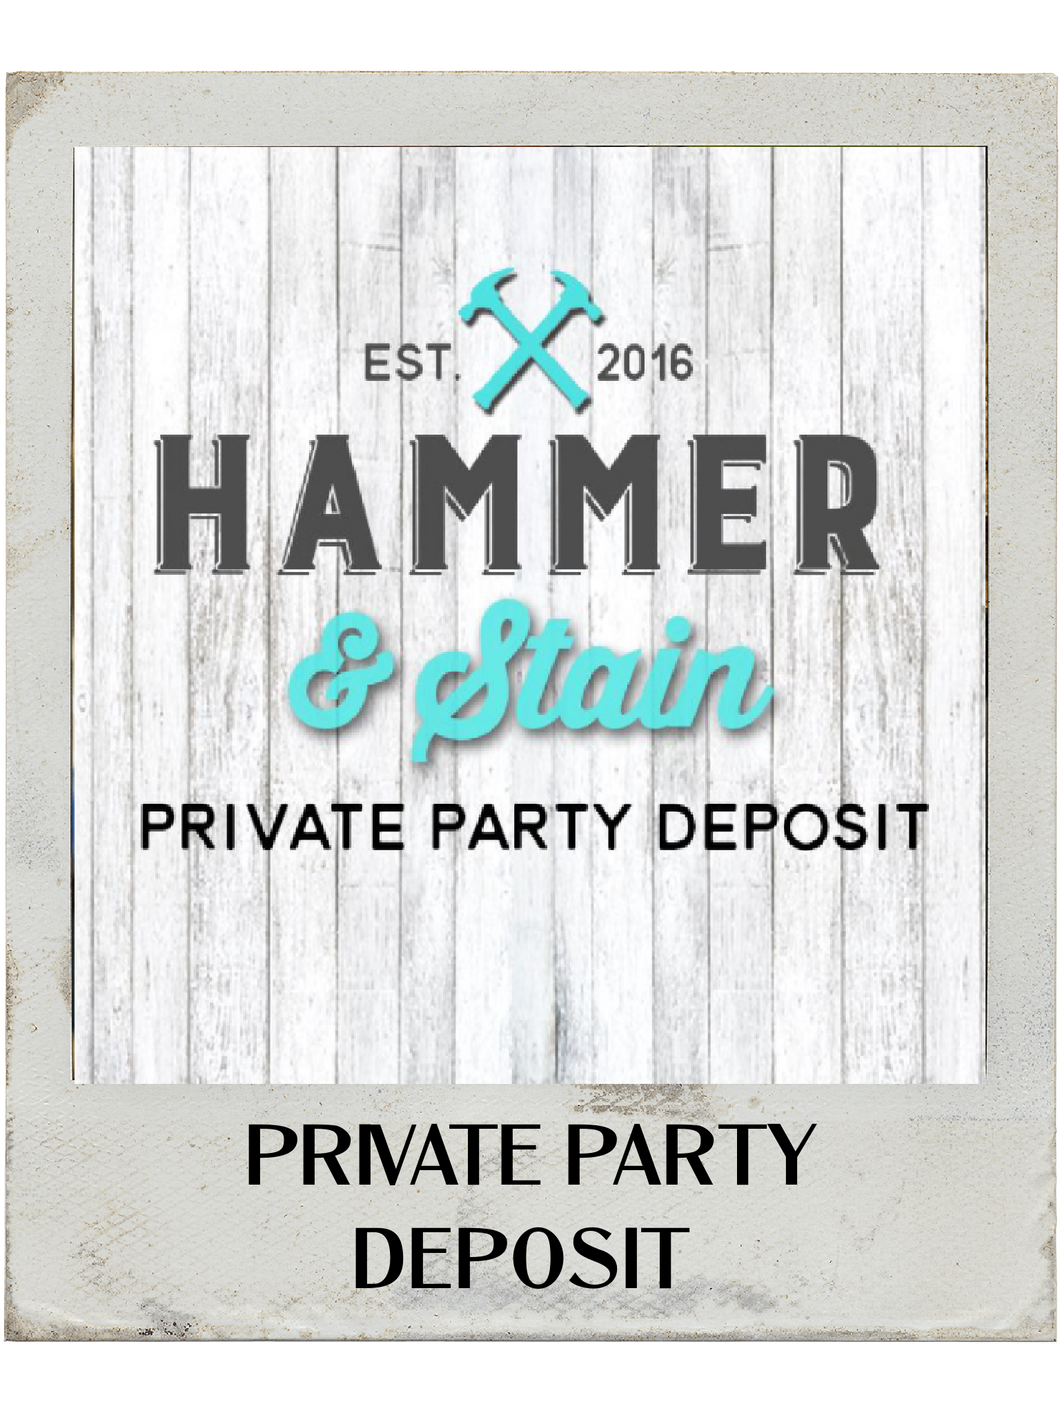 Private Party Deposit